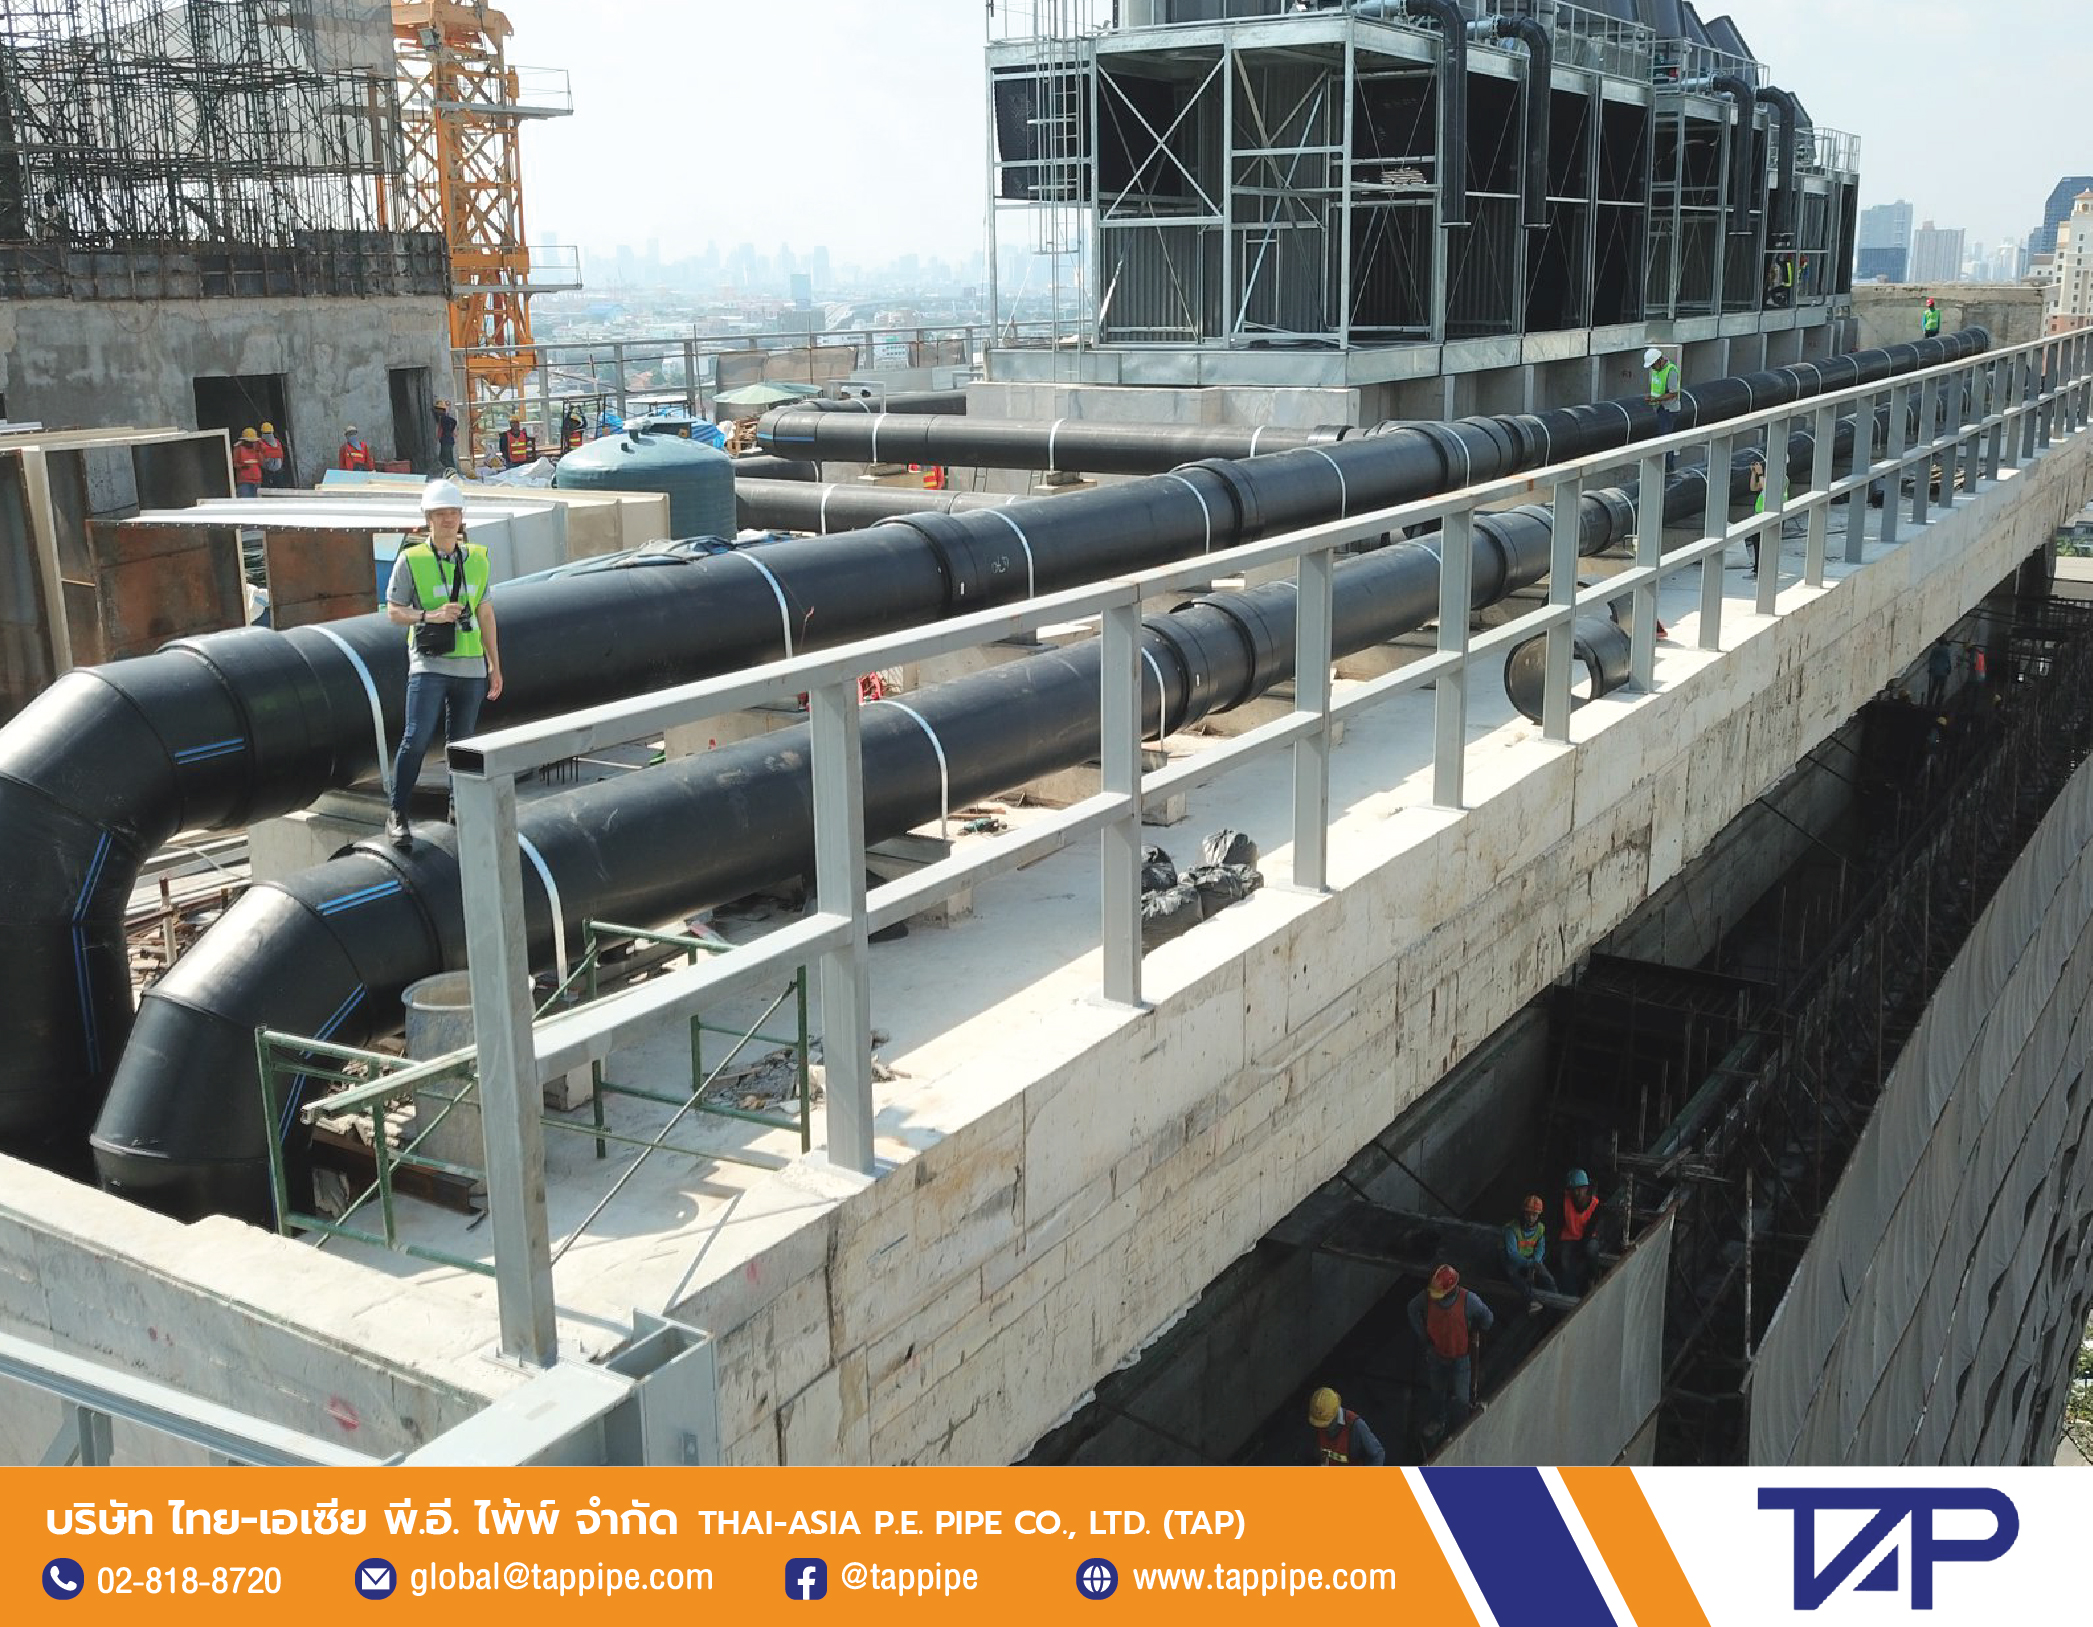 Picture of Work Progress of HDPE Pipe System (Line Cooling) - Image 2.